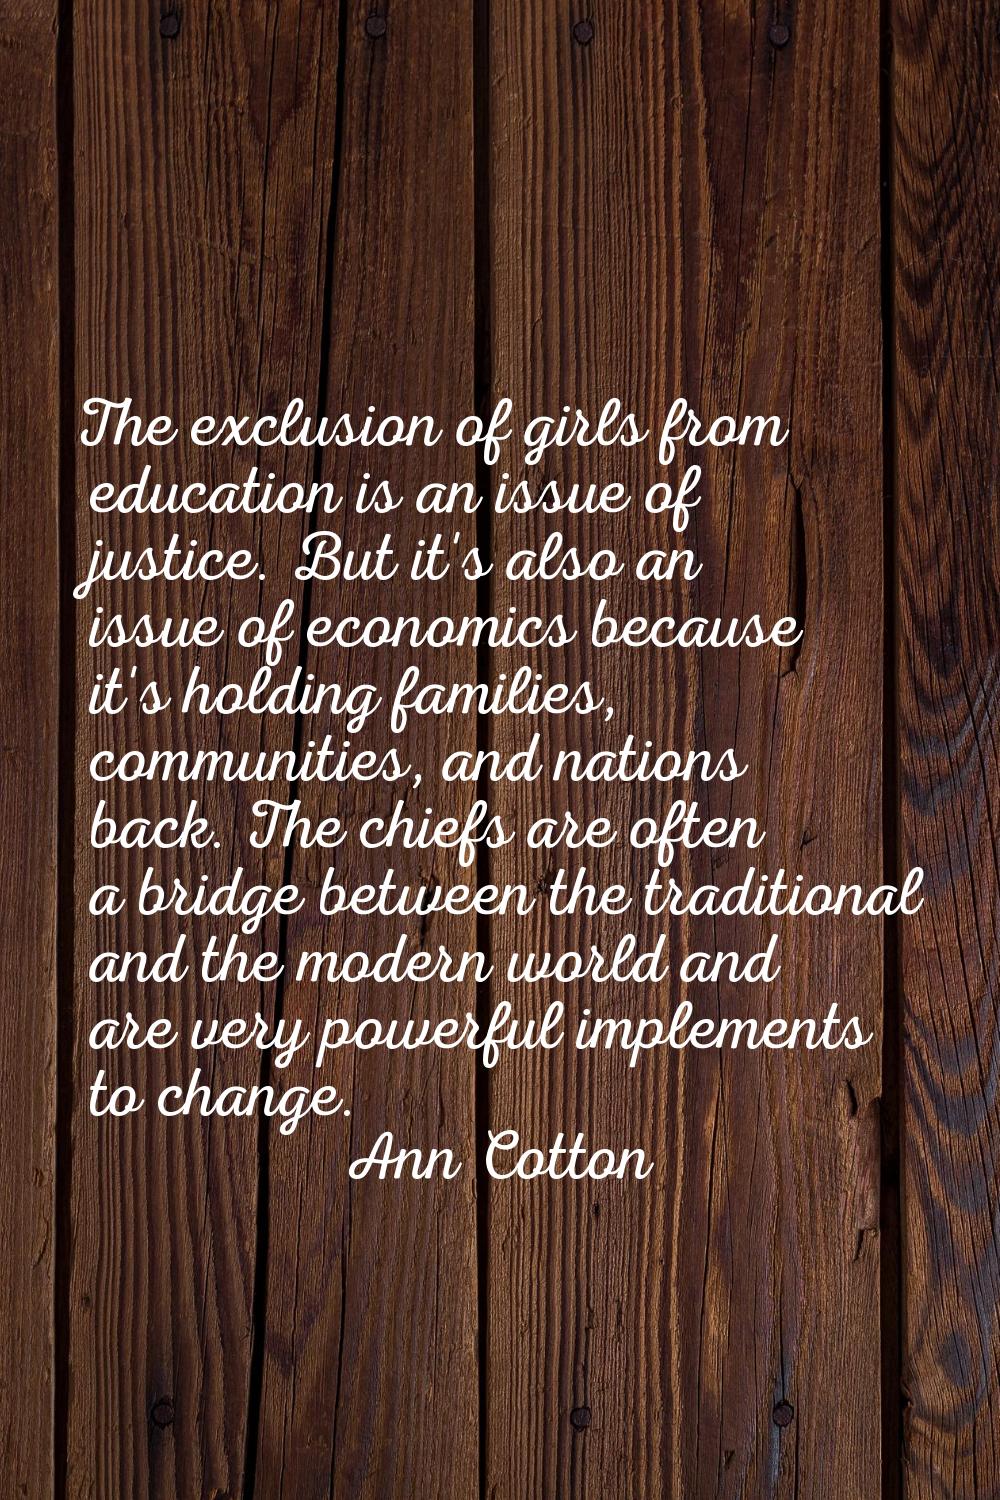 The exclusion of girls from education is an issue of justice. But it's also an issue of economics b